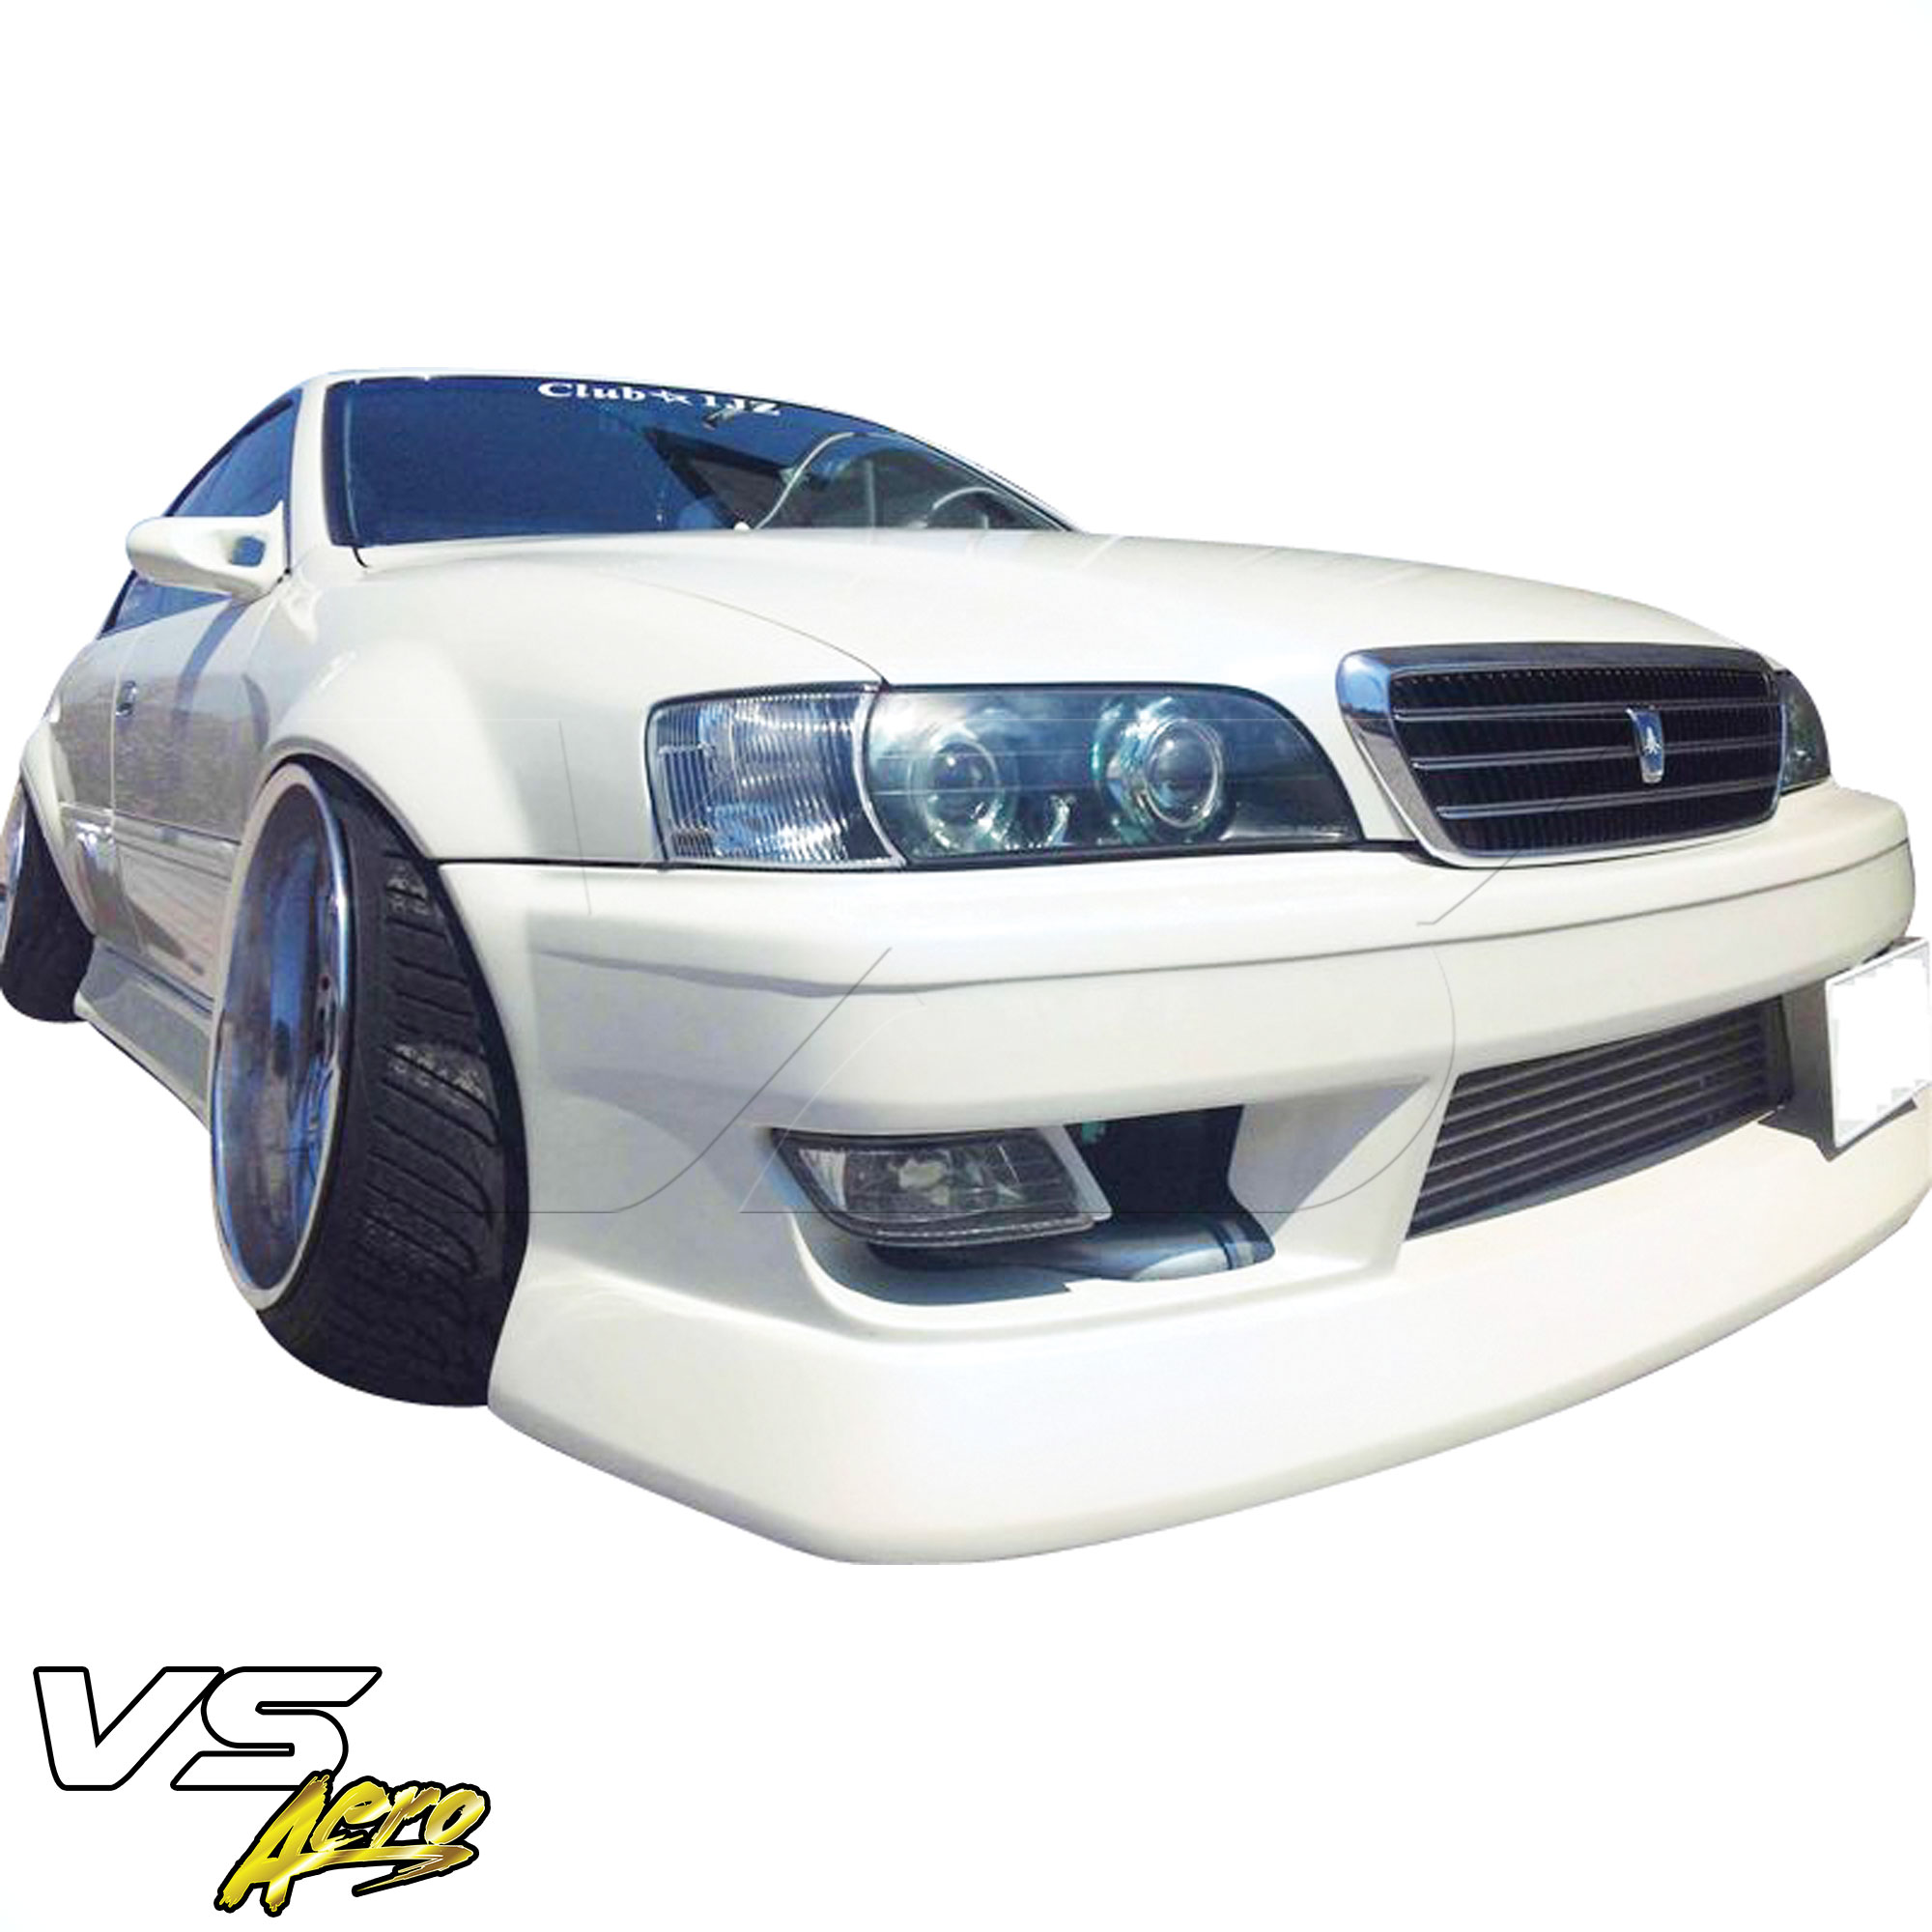 VSaero FRP BSPO Front Bumper > Toyota Chaser JZX100 1996-2000 - Image 2